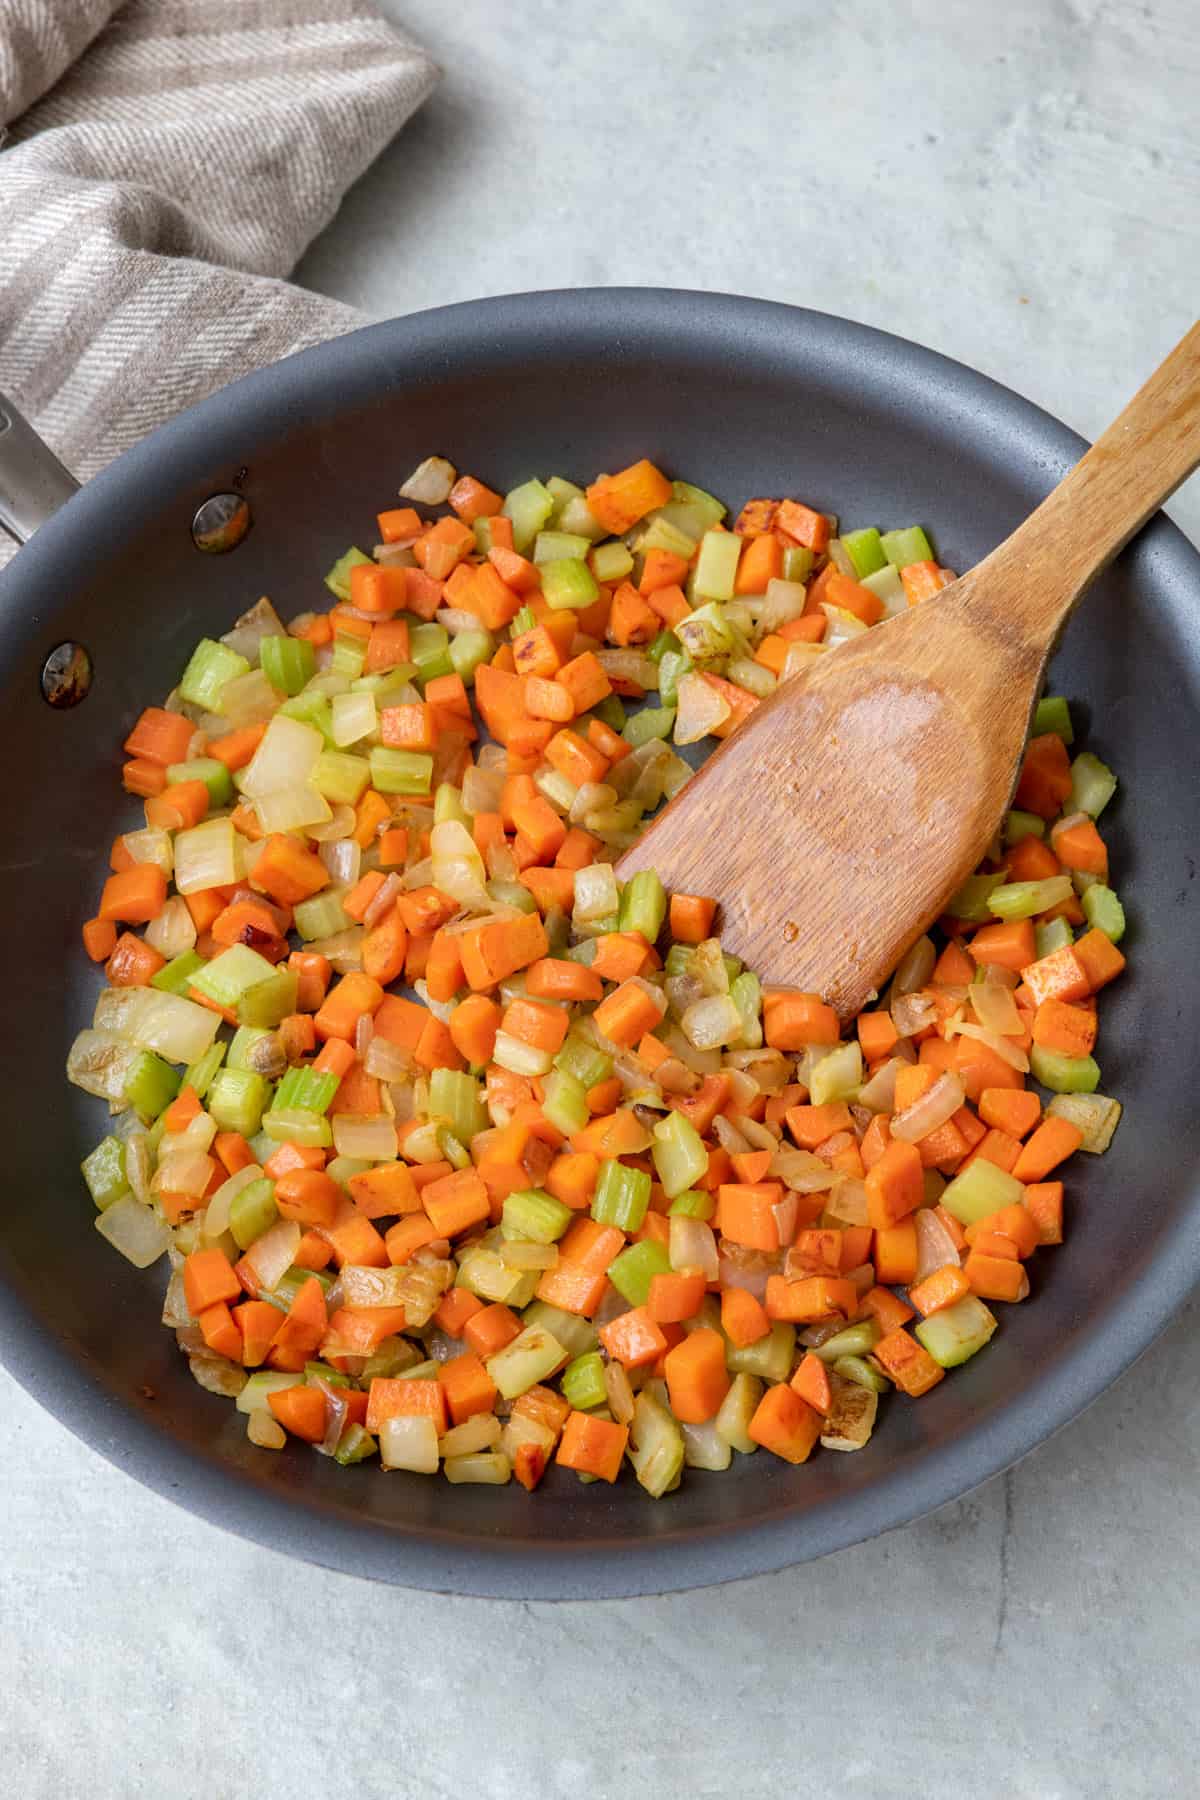 Mirepoix in a skillet after cooking.